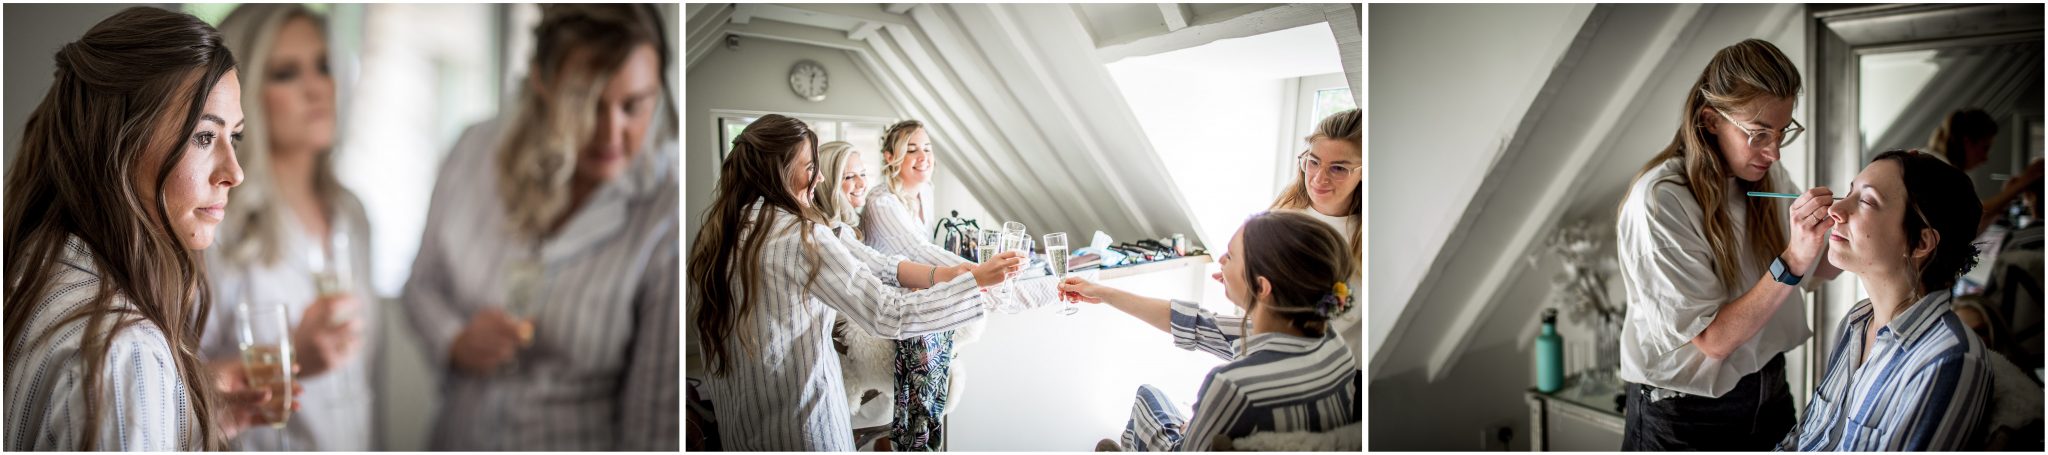 Bride and bridesmaids getting ready with champagne